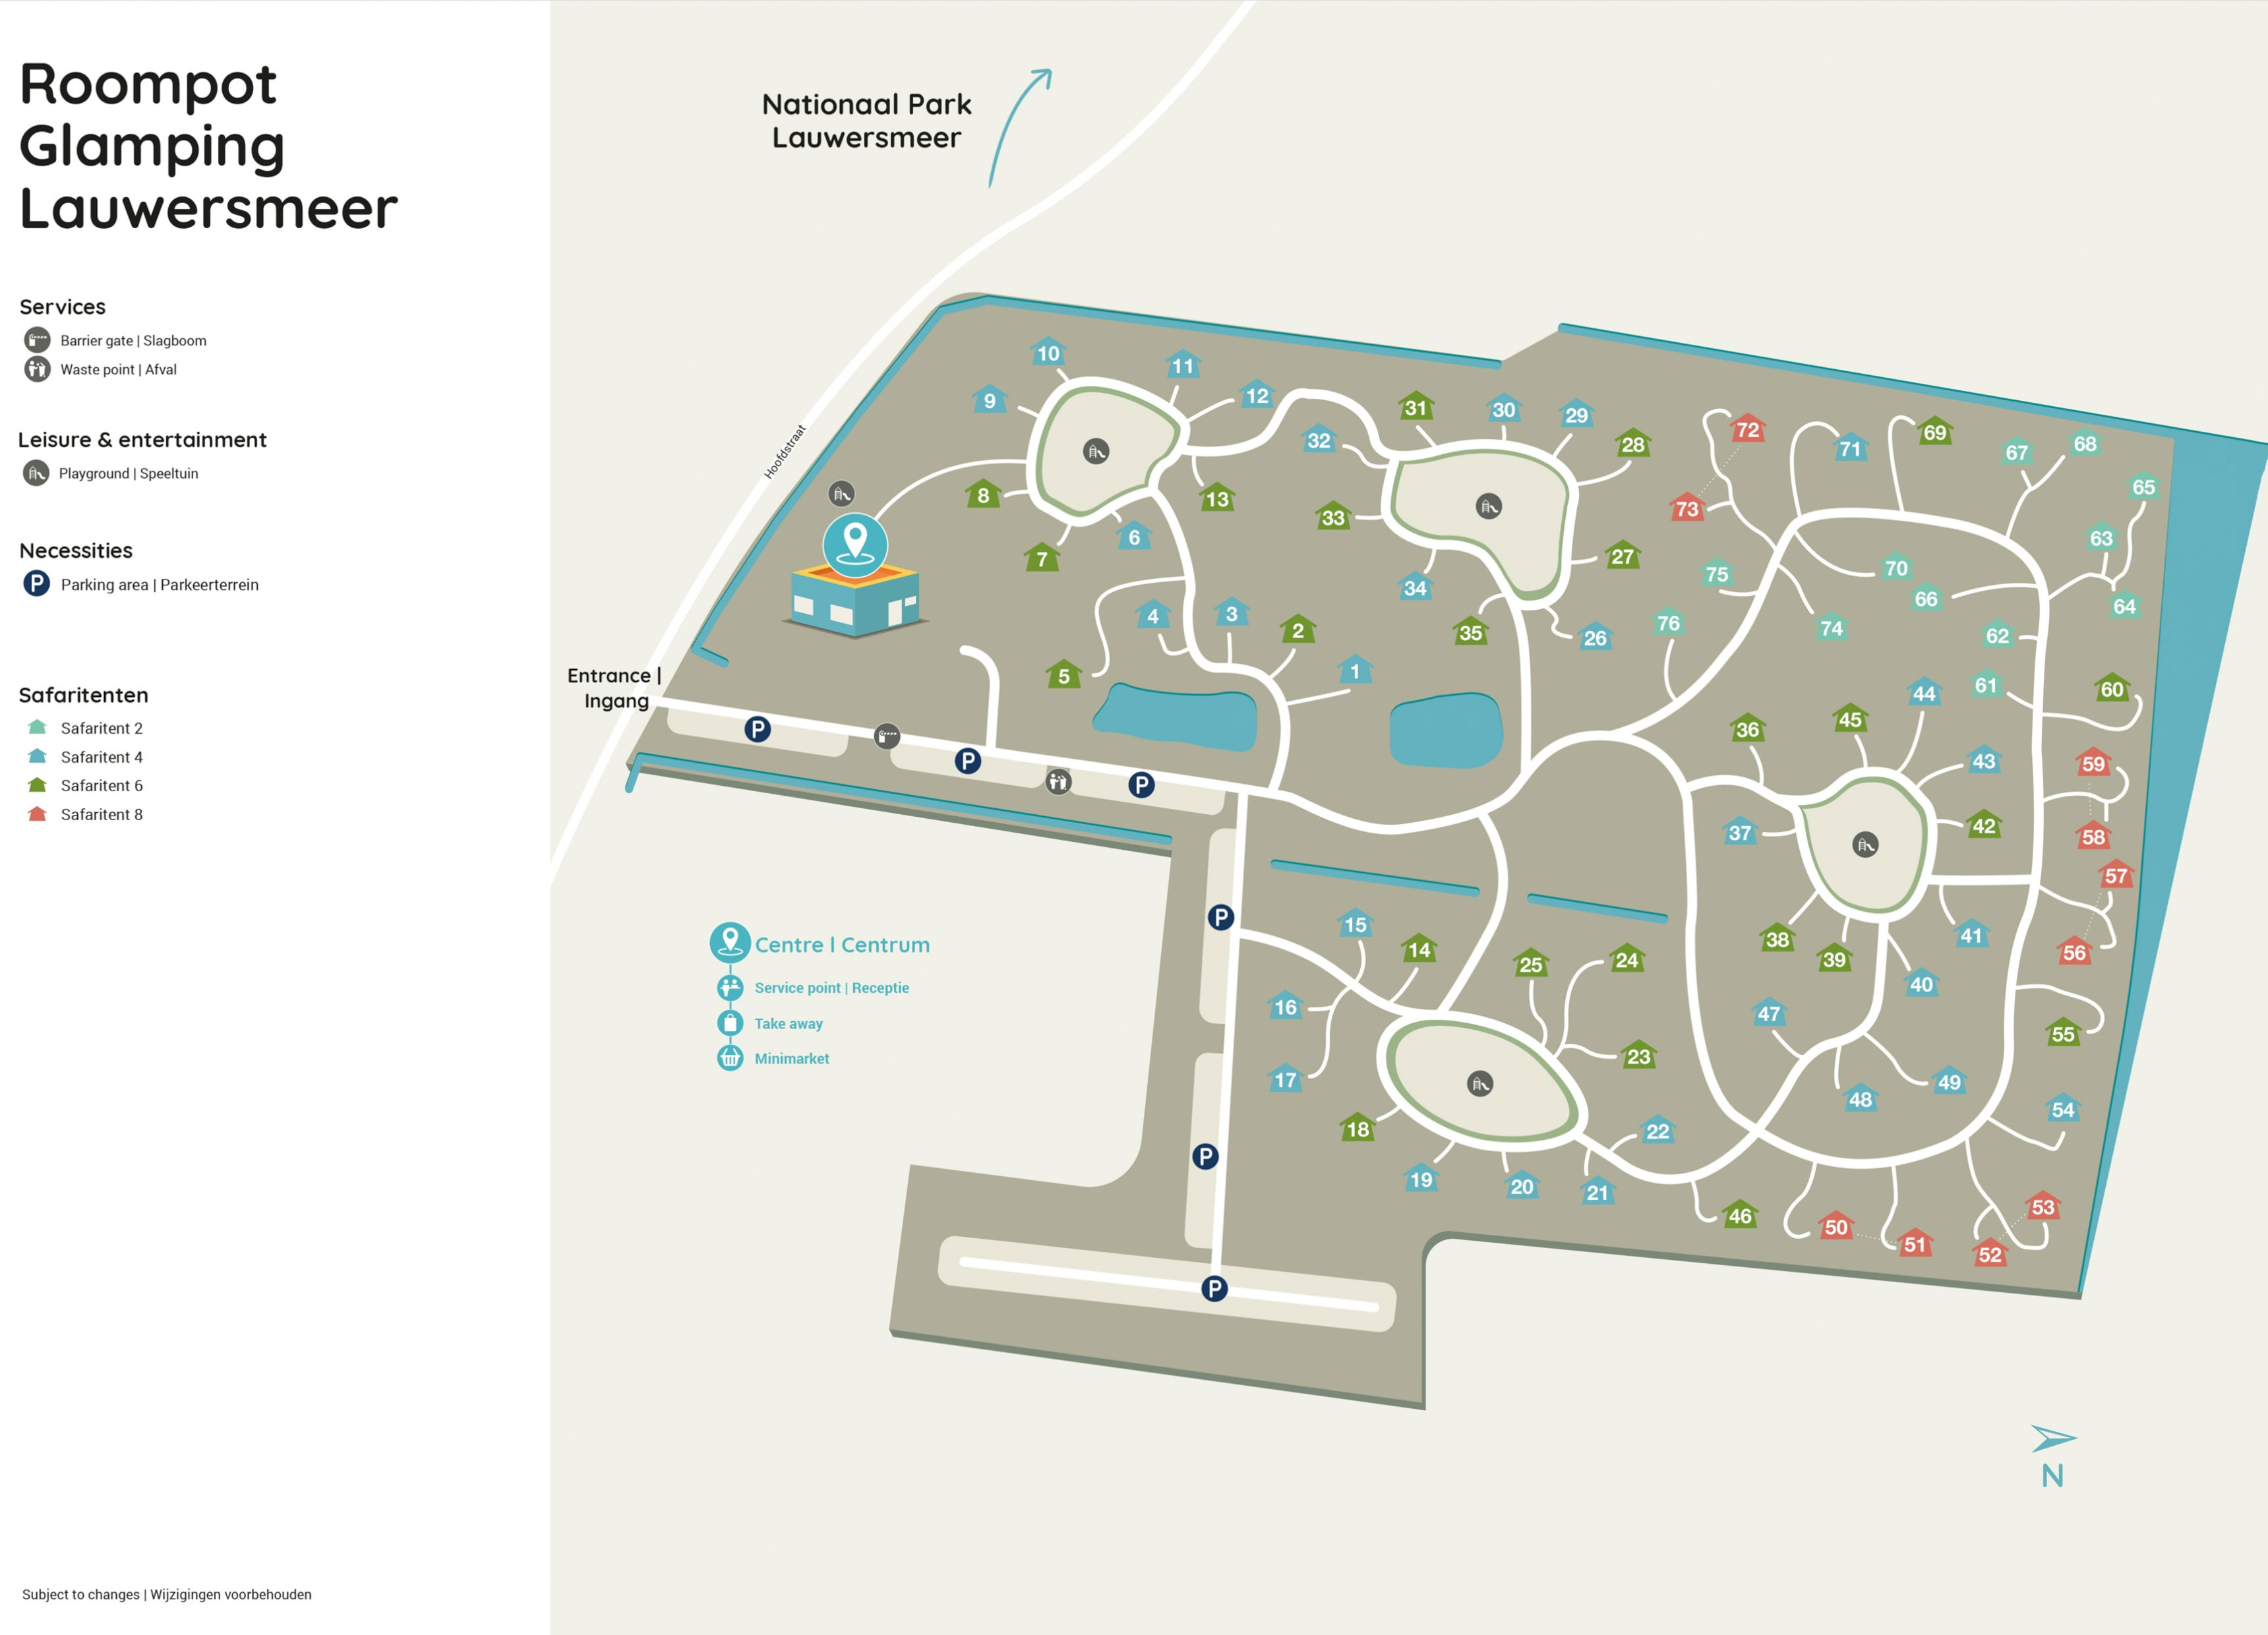 Campsite map Roompot Glamping Lauwersmeer